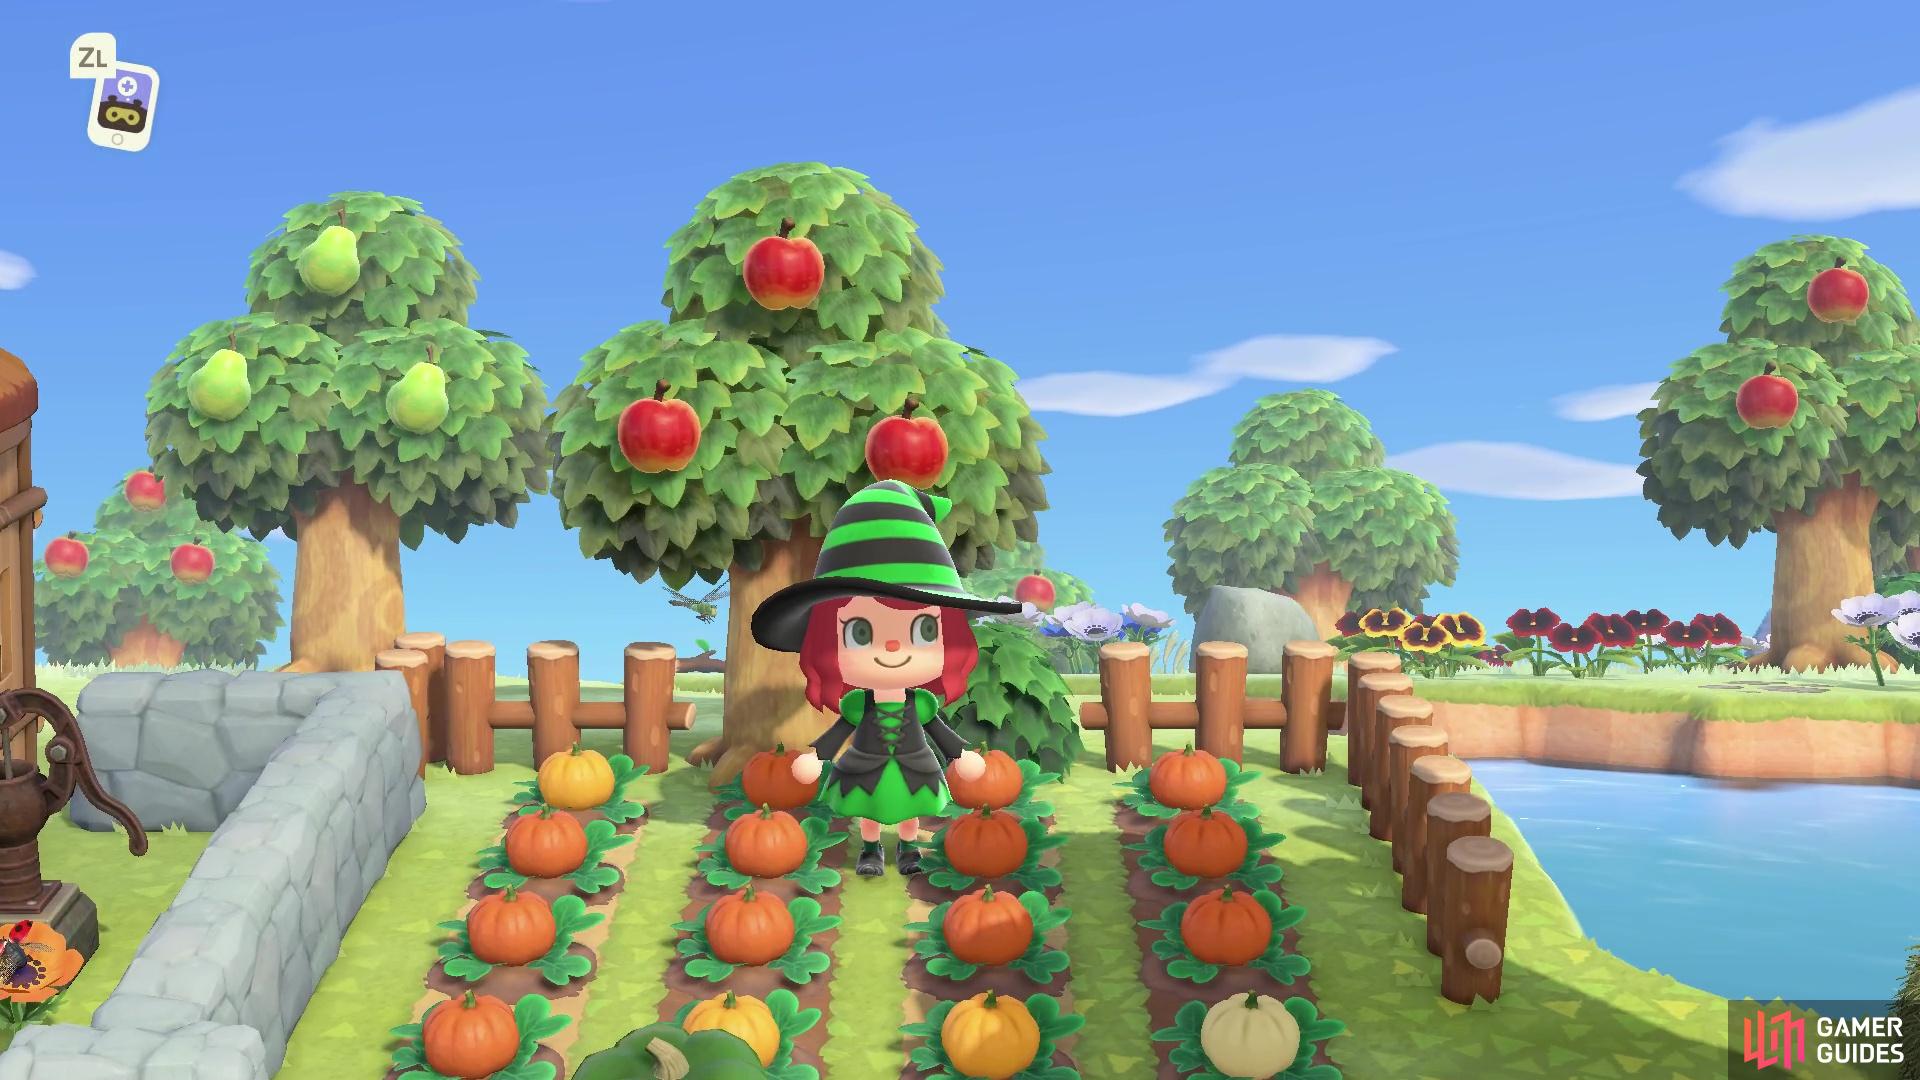 It’s time to plant some pumpkins ahead of Halloween!